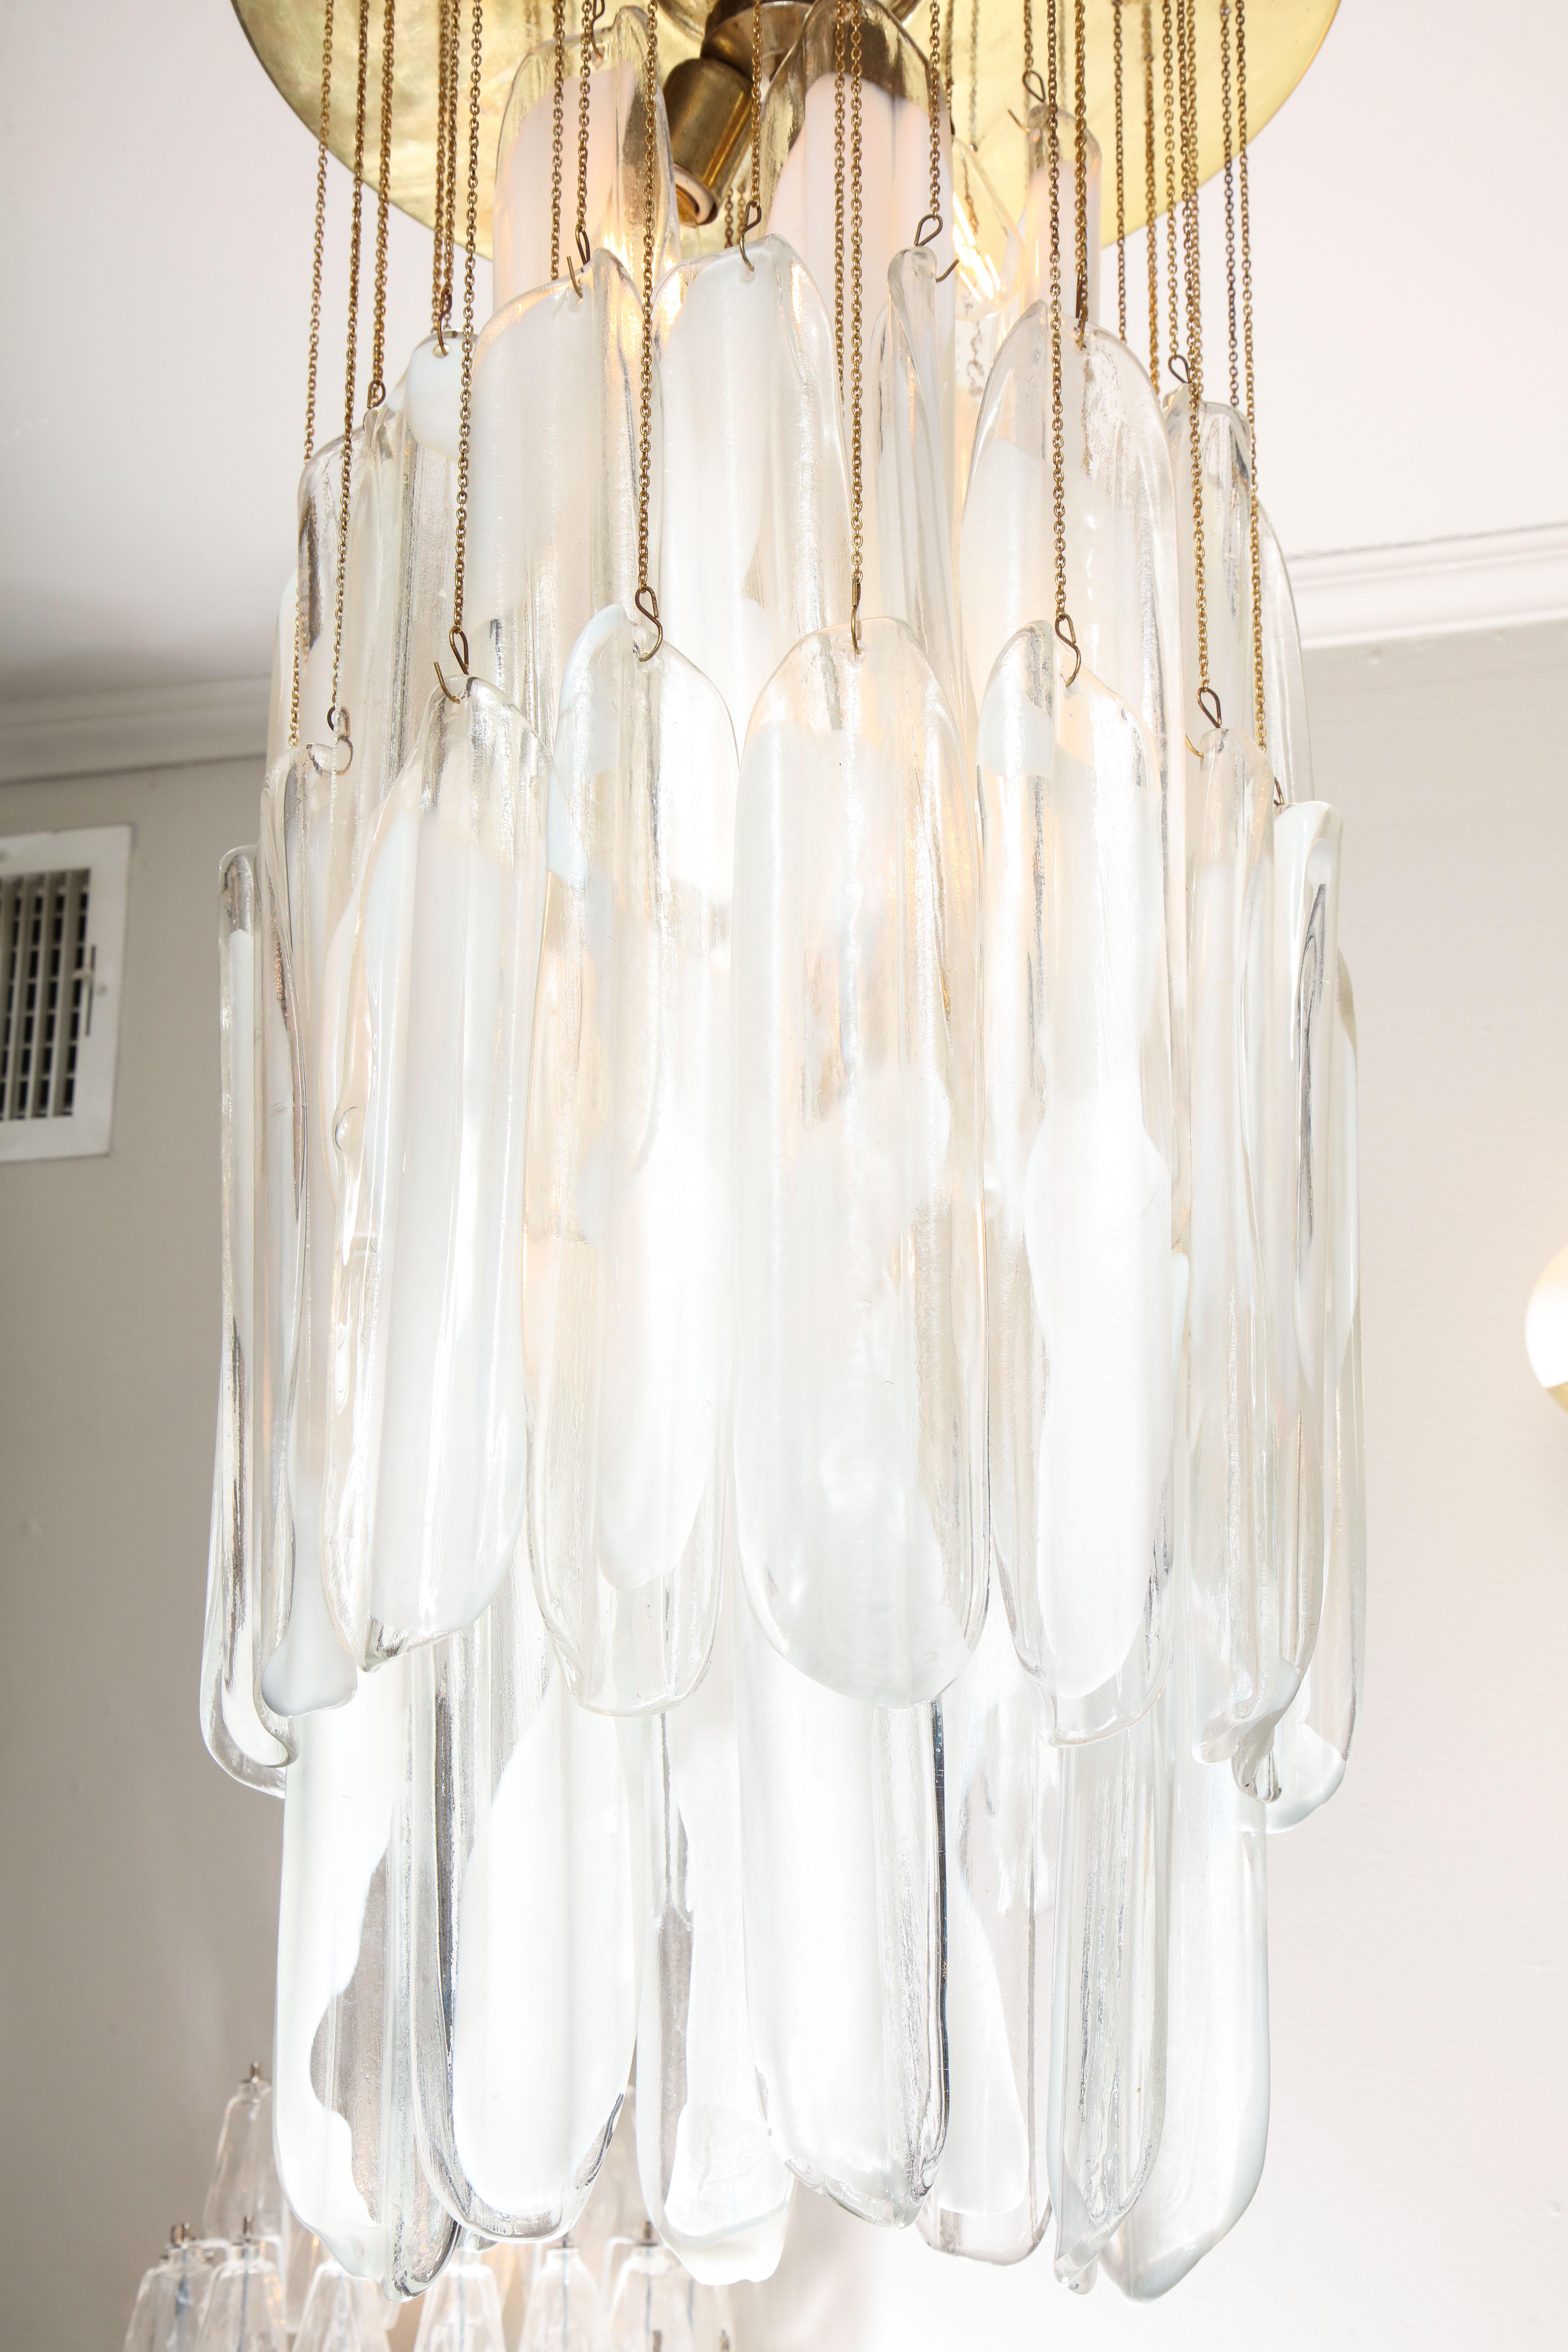 Vintage Mazzega Clear and White Oblong Leaf Glass Chandelier In Good Condition For Sale In New York, NY